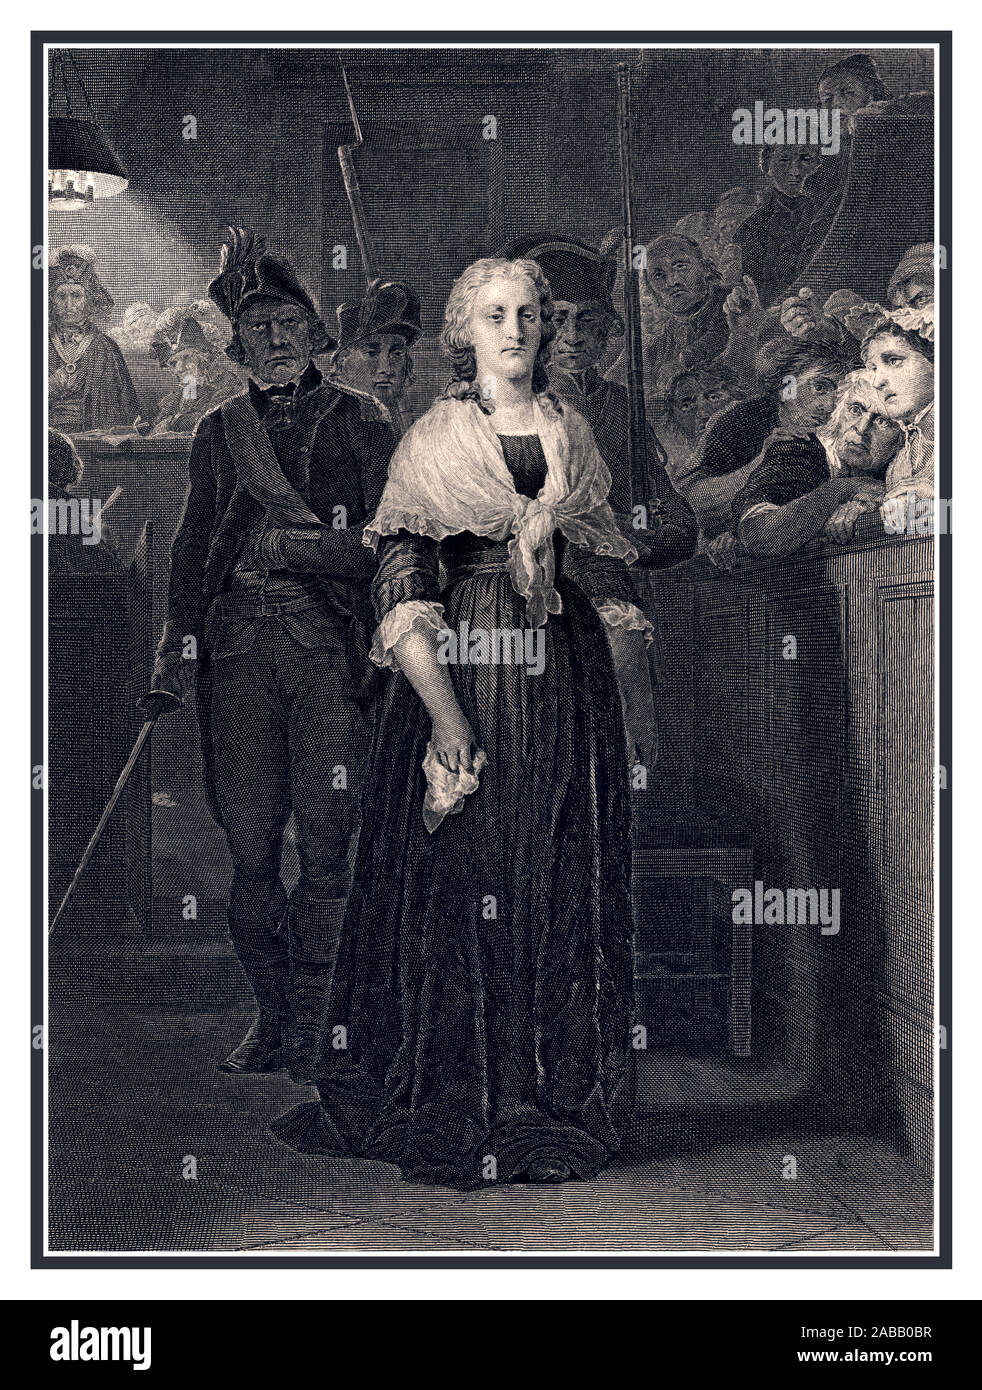 Vintage engraving of Marie Antoinette leaving the Revolutionary Tribunal  1862 showing Marie Antoinette being conducted back to prison after her trial during the French Revolution. Stock Photo